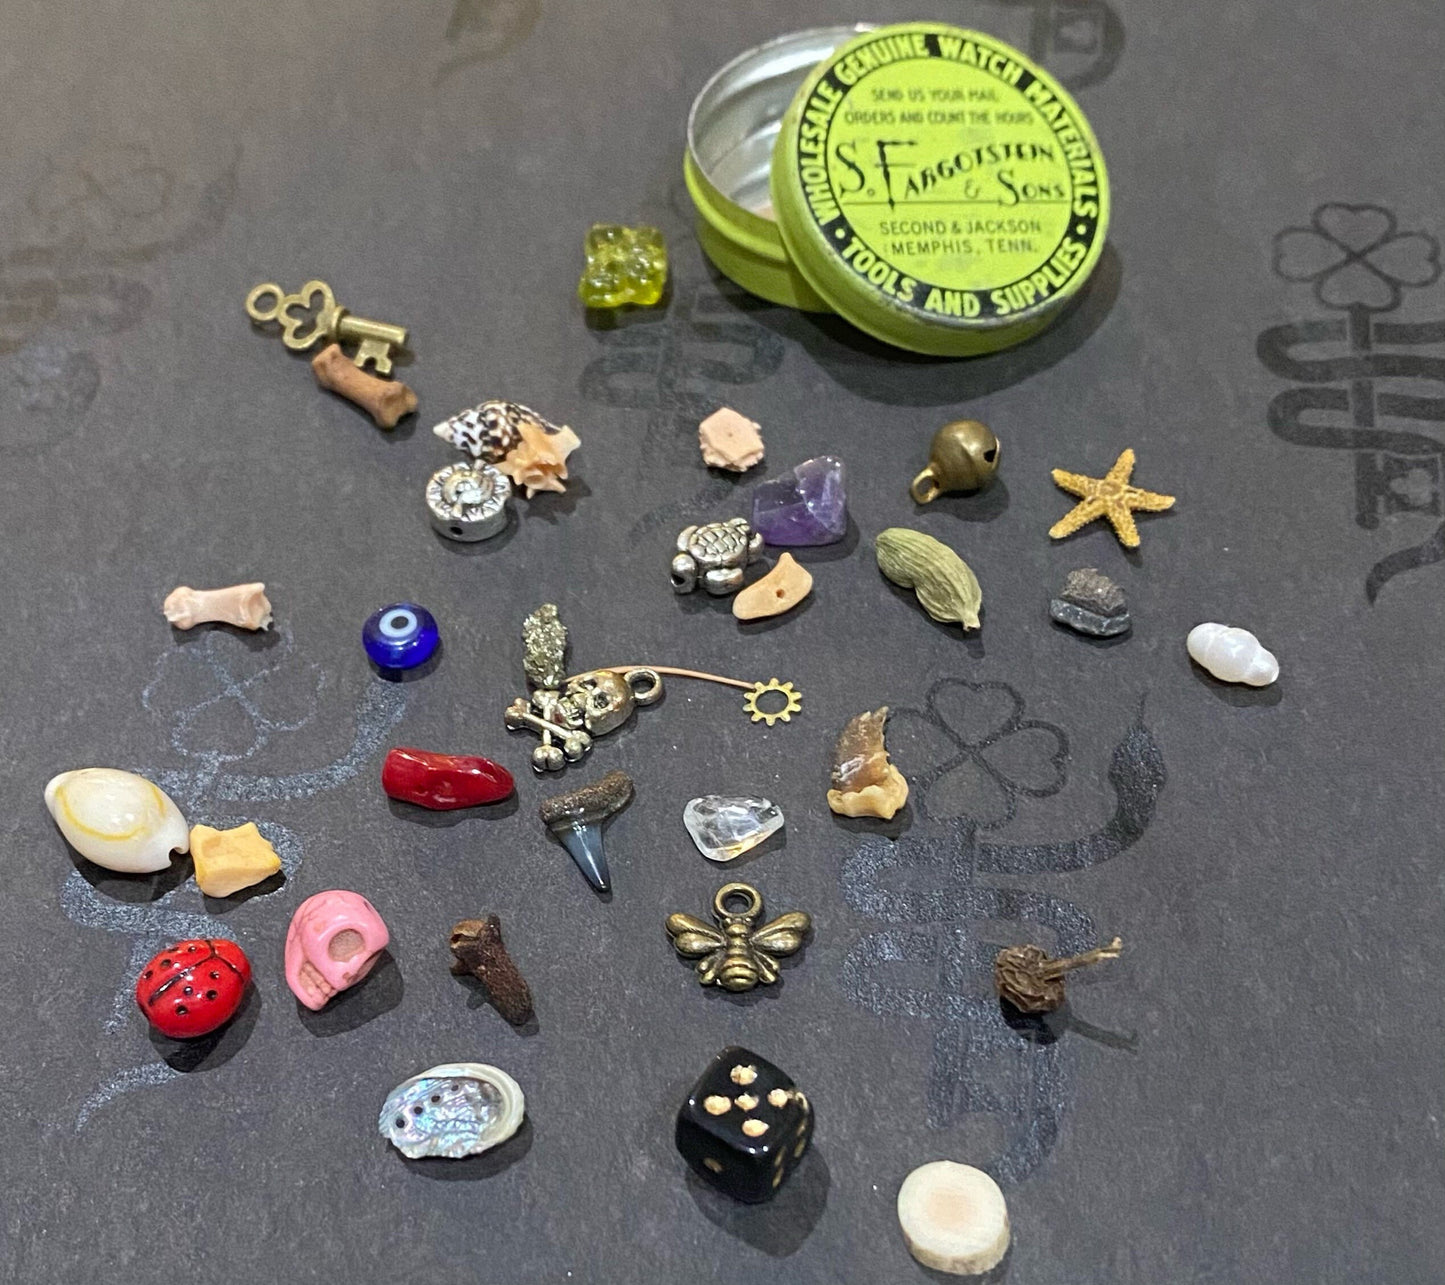 Small Vintage Fargostein Tinned Travel Bone, Shell, and Trinket Divination Collection (35 Pieces)